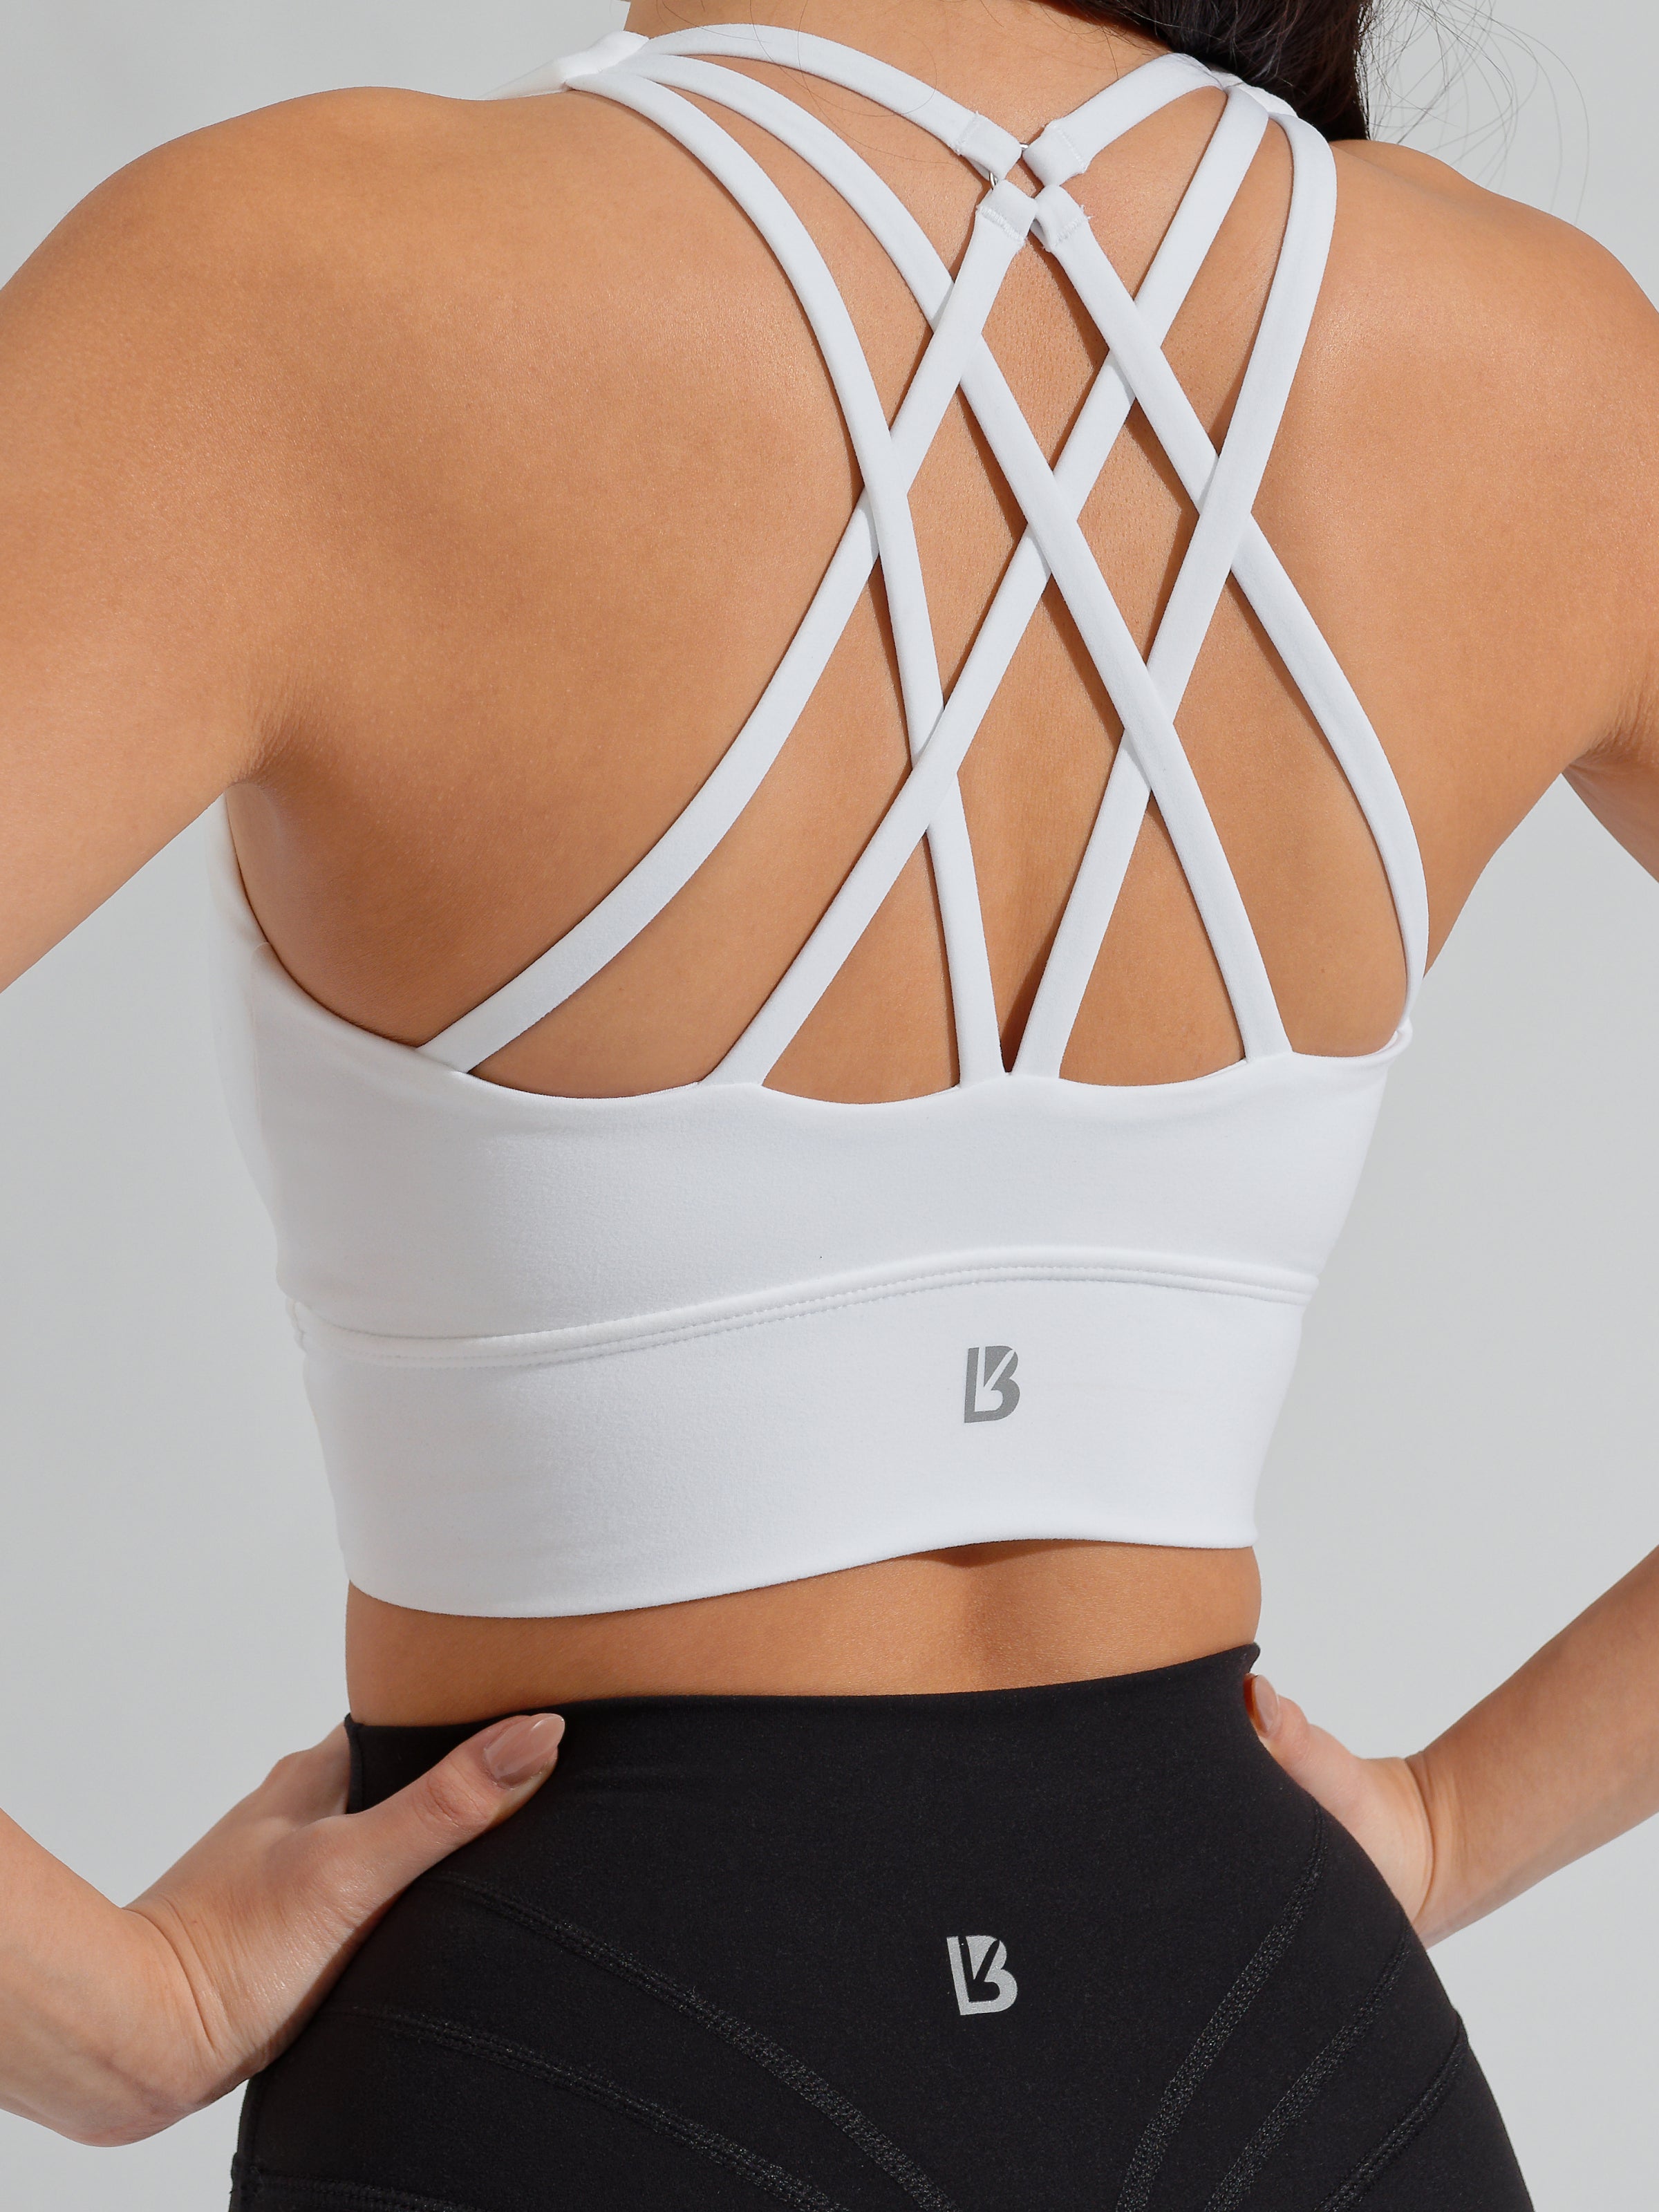 Buff Bunny Sports Bra - $23 New With Tags - From Isabella